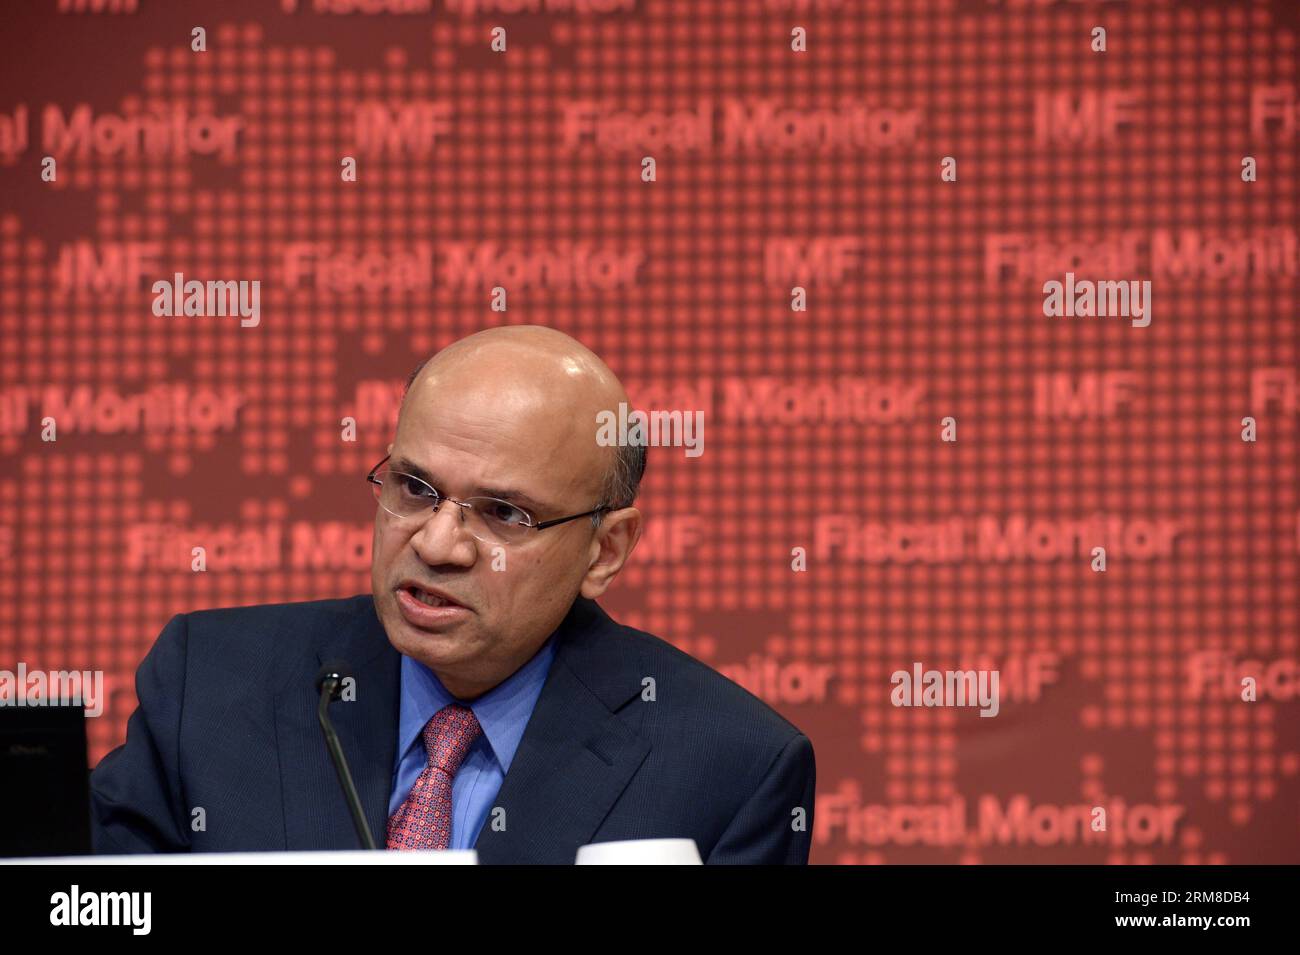 140409 -- WASHINGTON D.C., April 9, 2014 Xinhua -- Sanjeev Gupta, acting director of the Fiscal Affairs Department of the International Monetary Fund IMF, speaks at a press conference releasing the Global Financial Stability Report in Washington D.C., the United States, April 9, 2014. Global fiscal risks are abating somewhat but remain elevated, and underlying fiscal vulnerabilities have increased in emerging market economies during the past year, said the IMF on Wednesday in the newly-released report. Xinhua/Yin Bogu US-IMF-FISCAL MONITOR REPORT PUBLICATIONxNOTxINxCHN Stock Photo